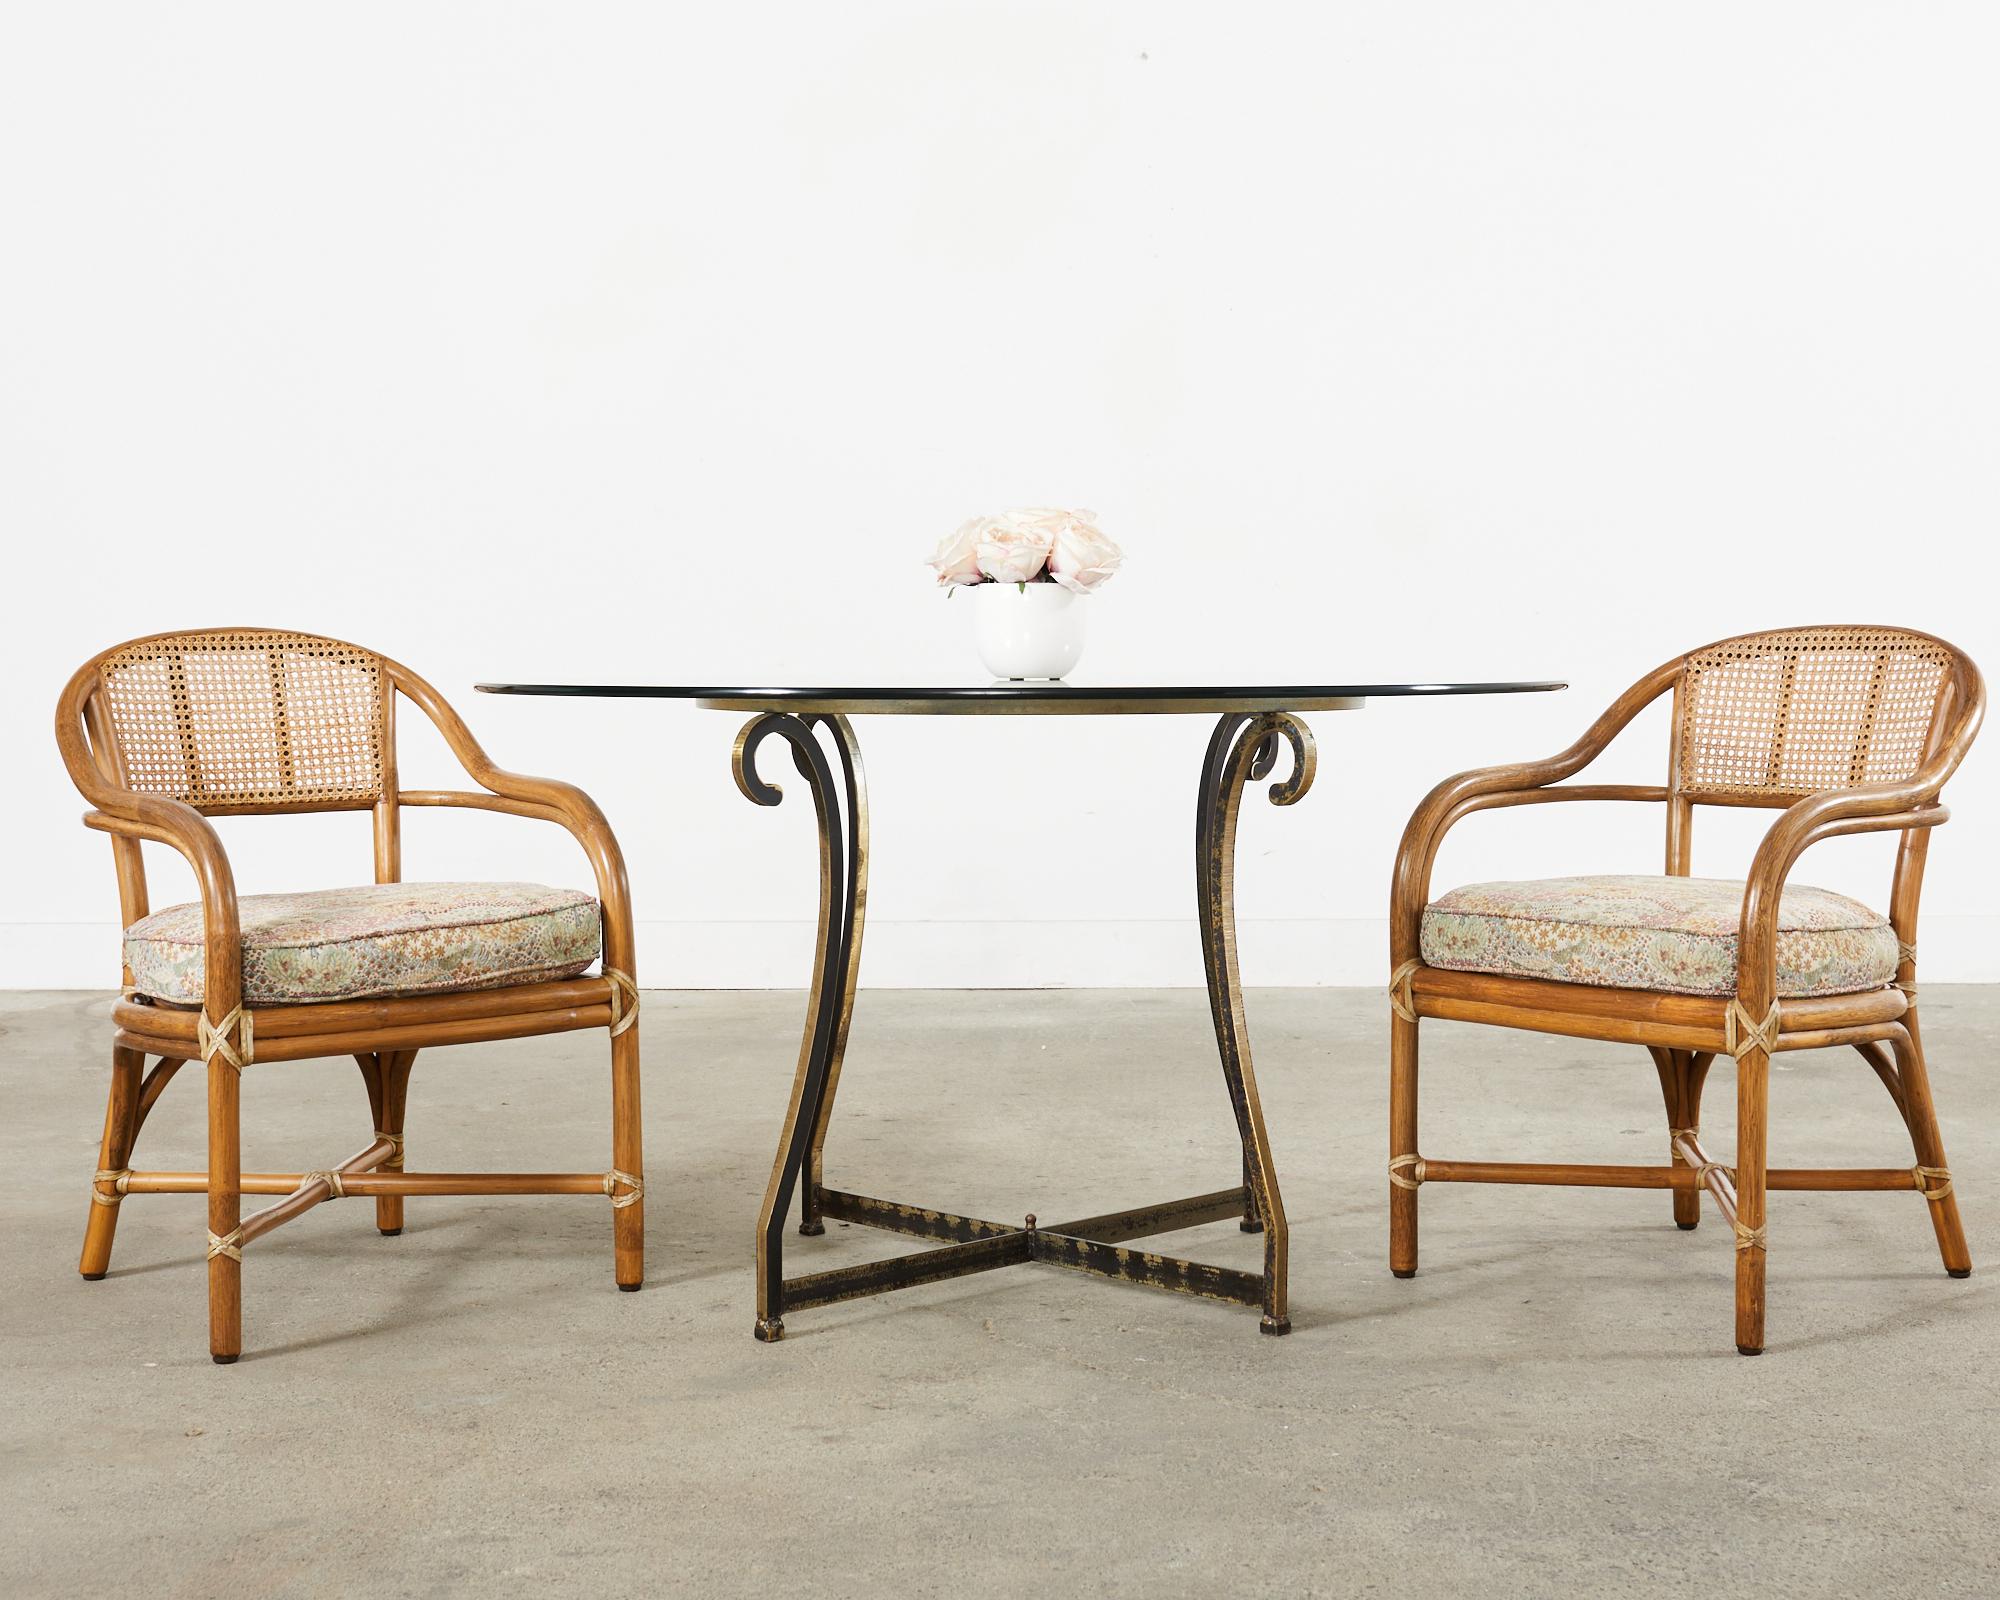 Graceful pair of bent rattan armchairs or dining chairs made in the California coastal organic modern style by McGuire. The chairs feature a thick pole rattan frame inset with woven honeycomb cane on the seat backs. Each seat has a thick fitted seat